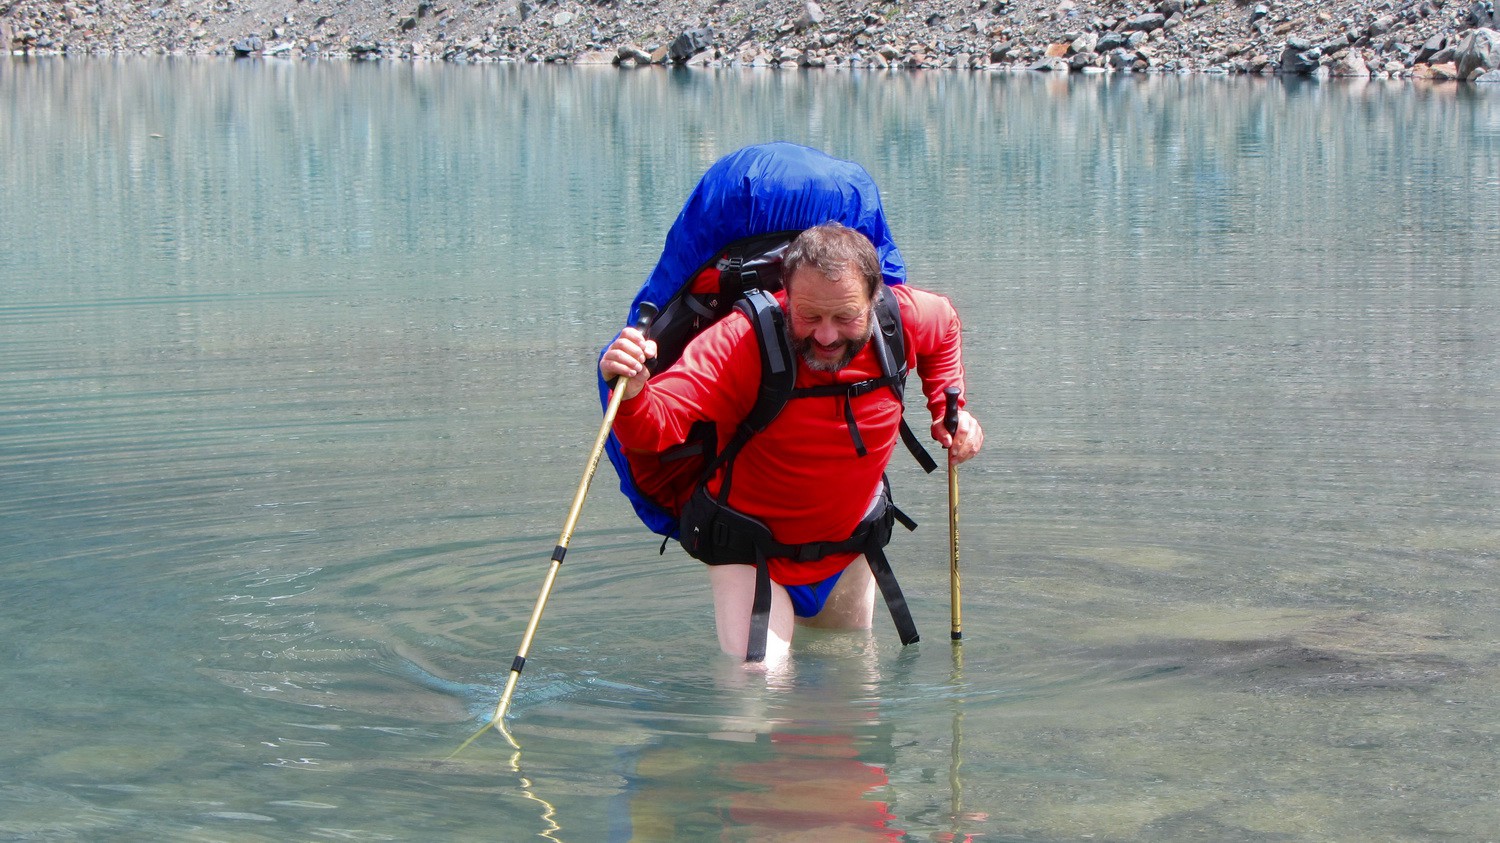 Tommy is carrying a heavy backpack in the deep water